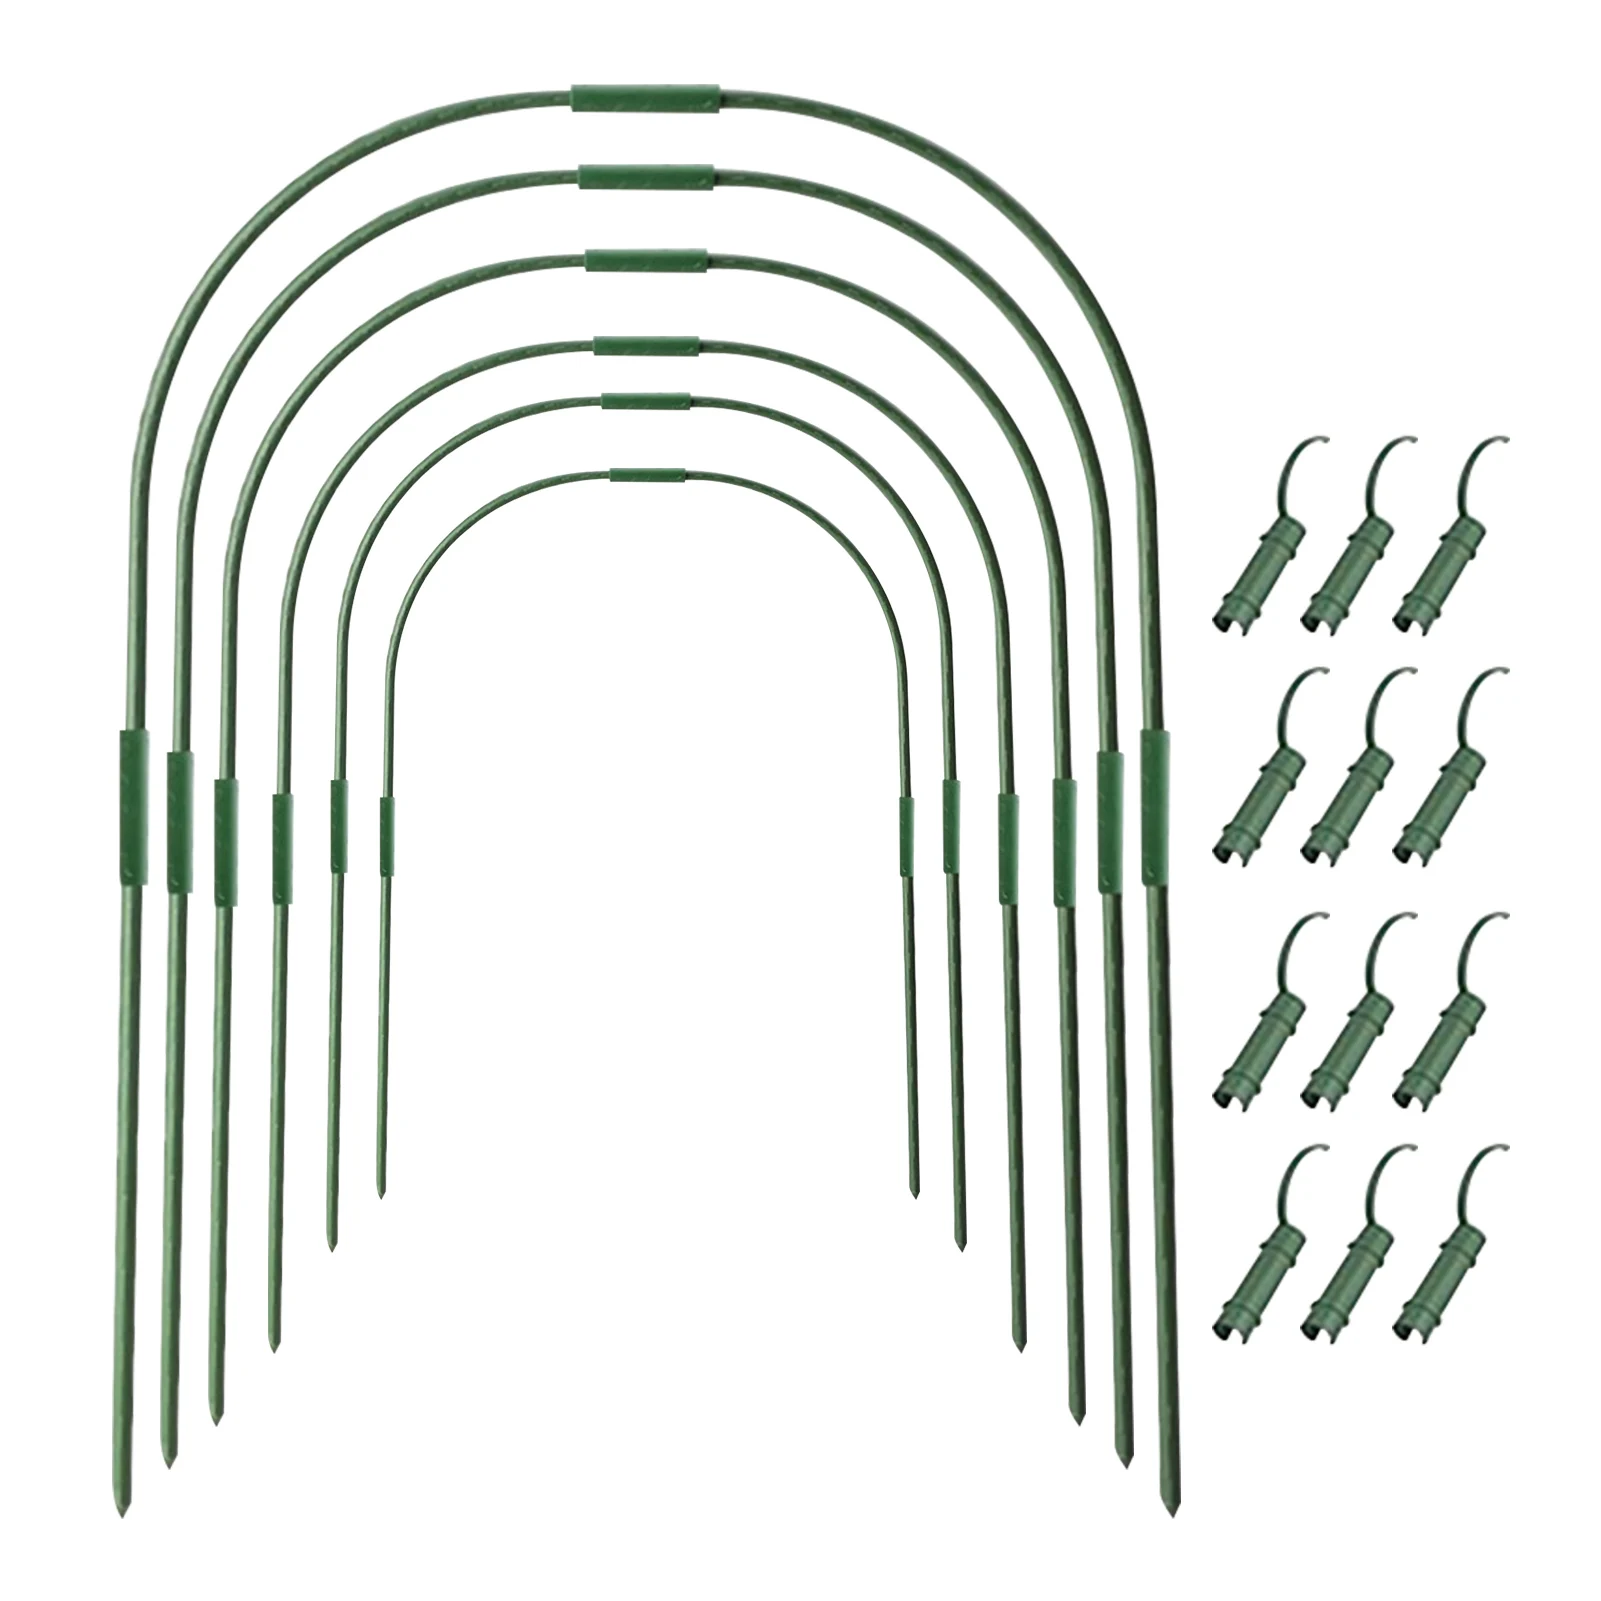 54pcs Sturdy Connector Row Cover Clip Steel DIY Vegetable Garden Tunnel Plant Support Frame Stakes Greenhouse Hoop Set Growing